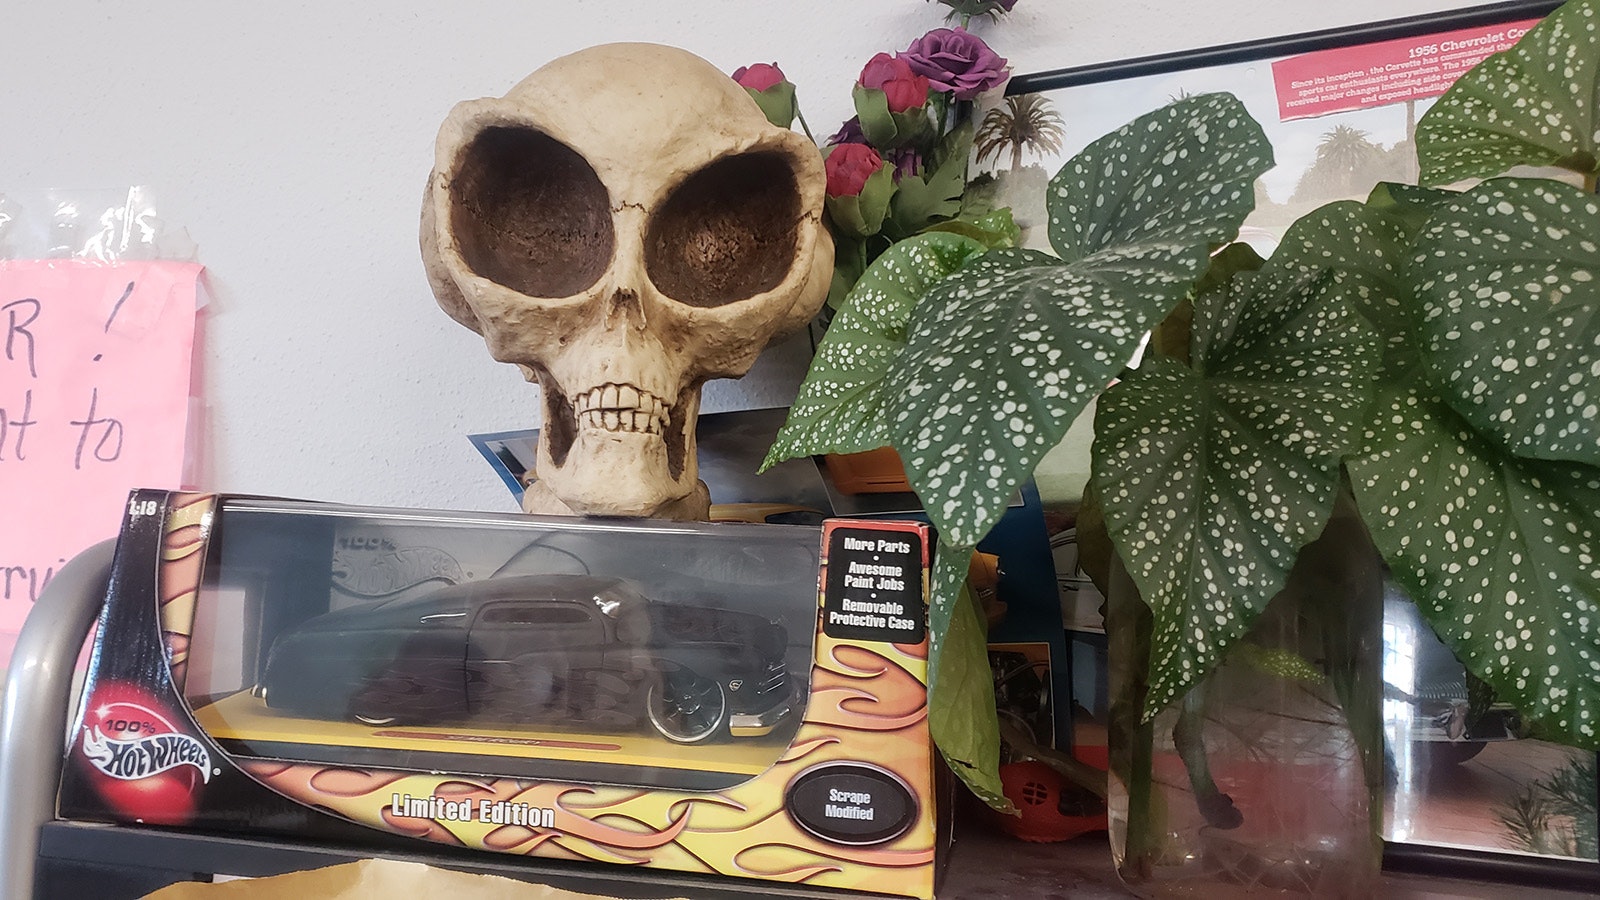 A friend gave Desiree Ross the car below this skull, which represents her dream car, and urged her to put it where she can see it every day so that her dream would come true.